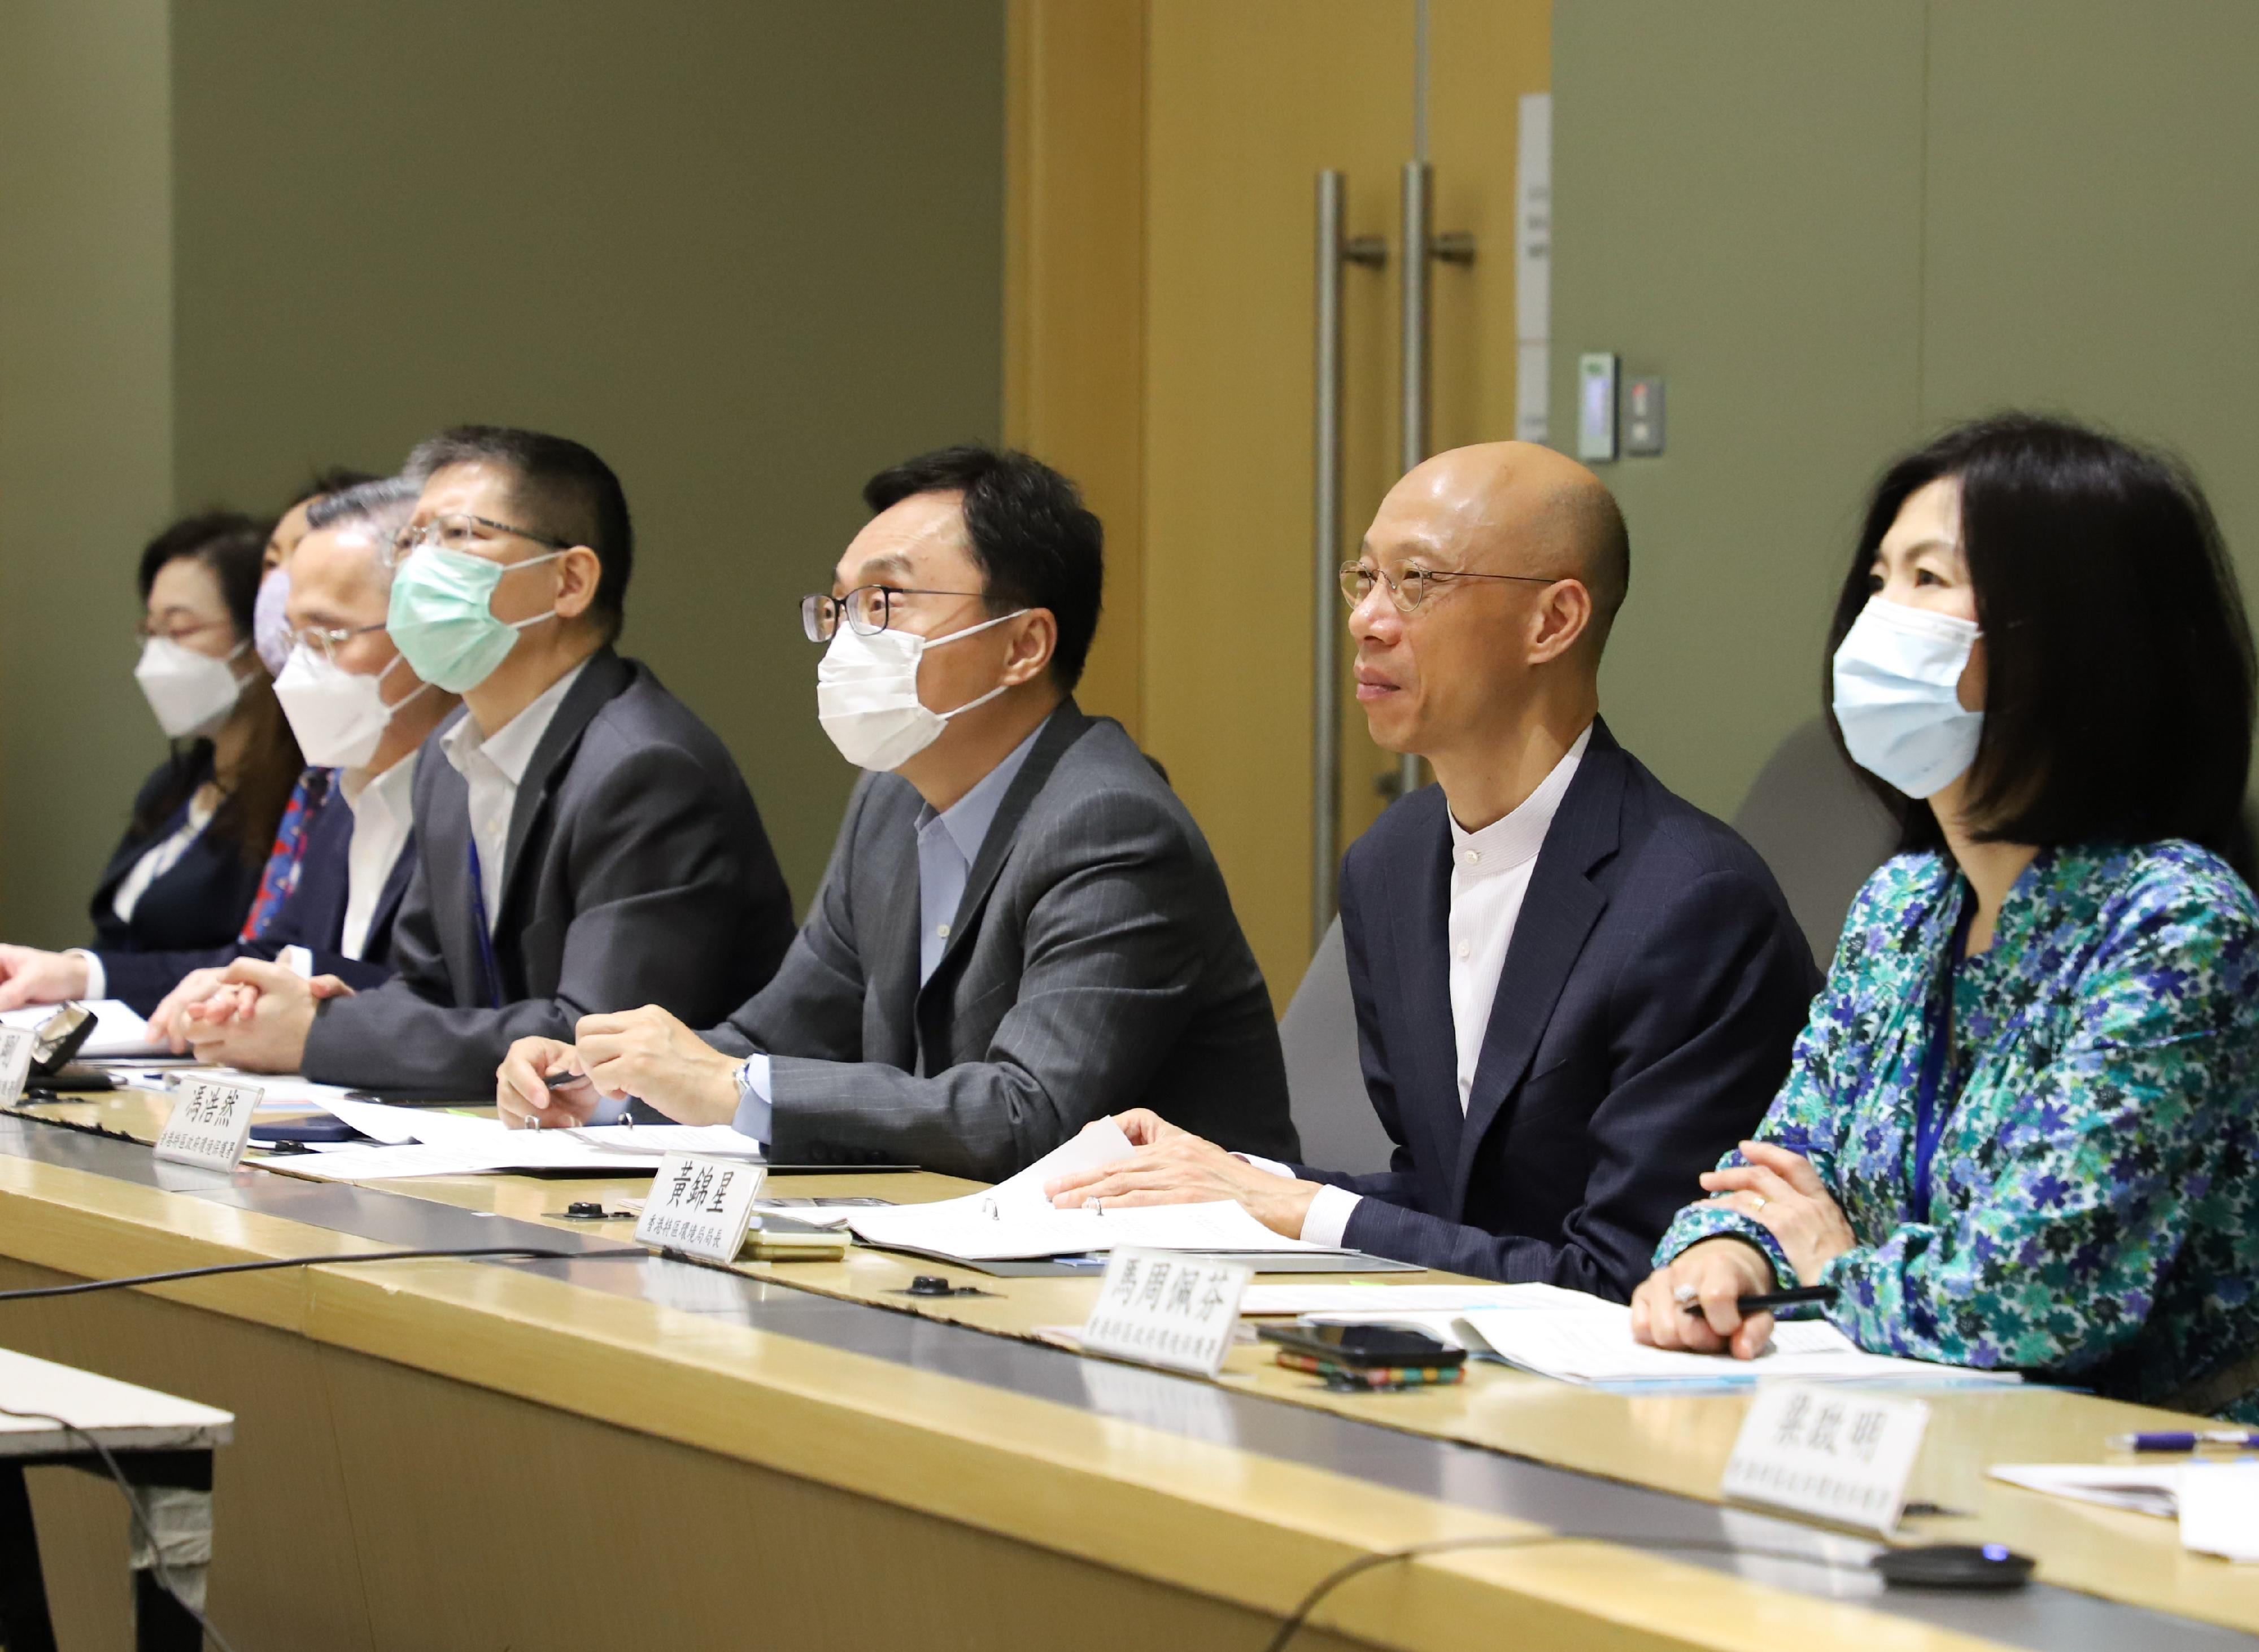 The third meeting of the Hong Kong-Guangdong Joint Working Group on Environmental Protection and Combating Climate Change was held via video conference today (December 16) to review the progress of collaboration between the two sides in 2021 and agree on the work plan for 2022. Photo shows the Secretary for the Environment, Mr Wong Kam-sing (second right), together with the members of the Hong Kong Special Administrative Region Government delegation.